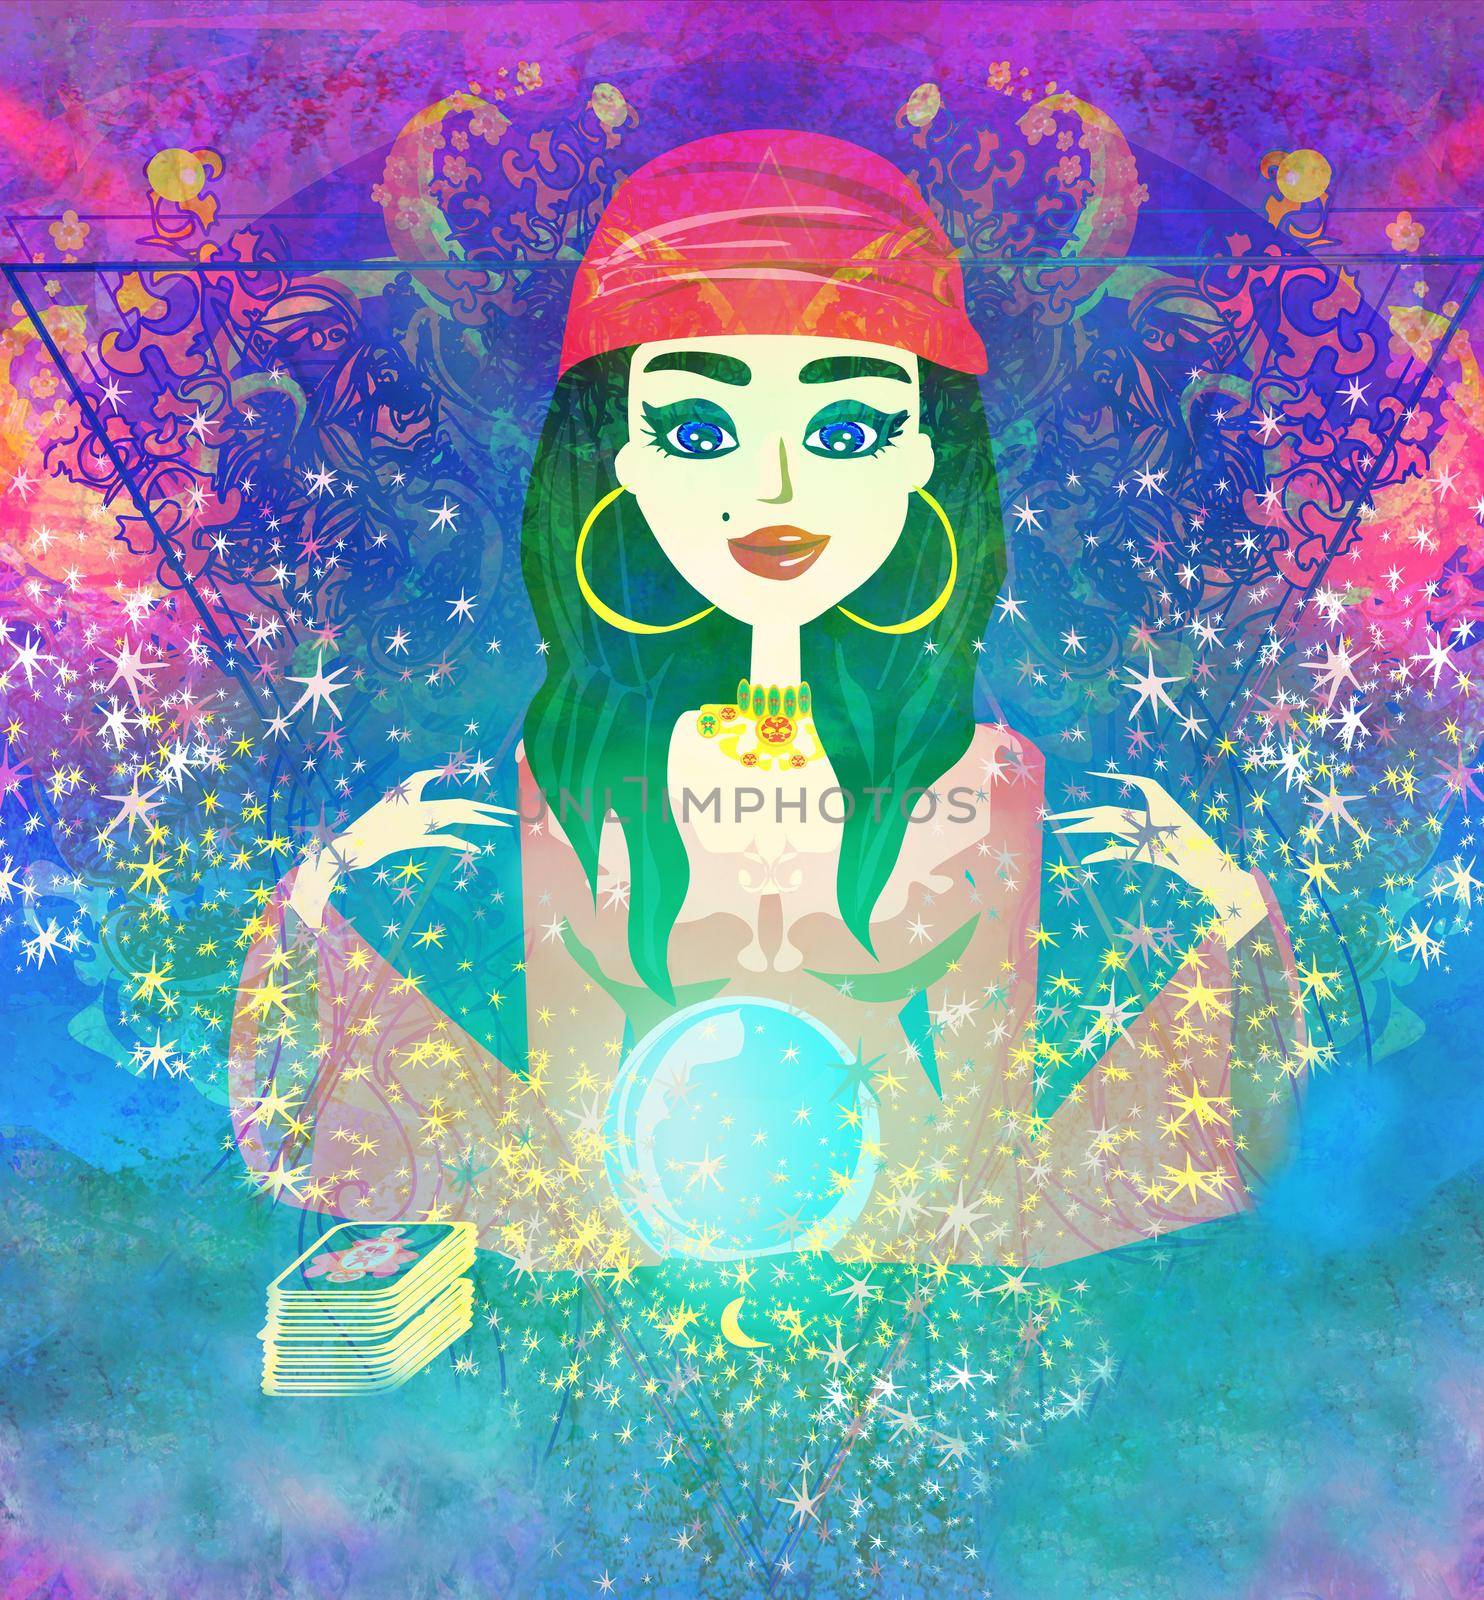 Fortune teller woman reading future on magical crystal ball